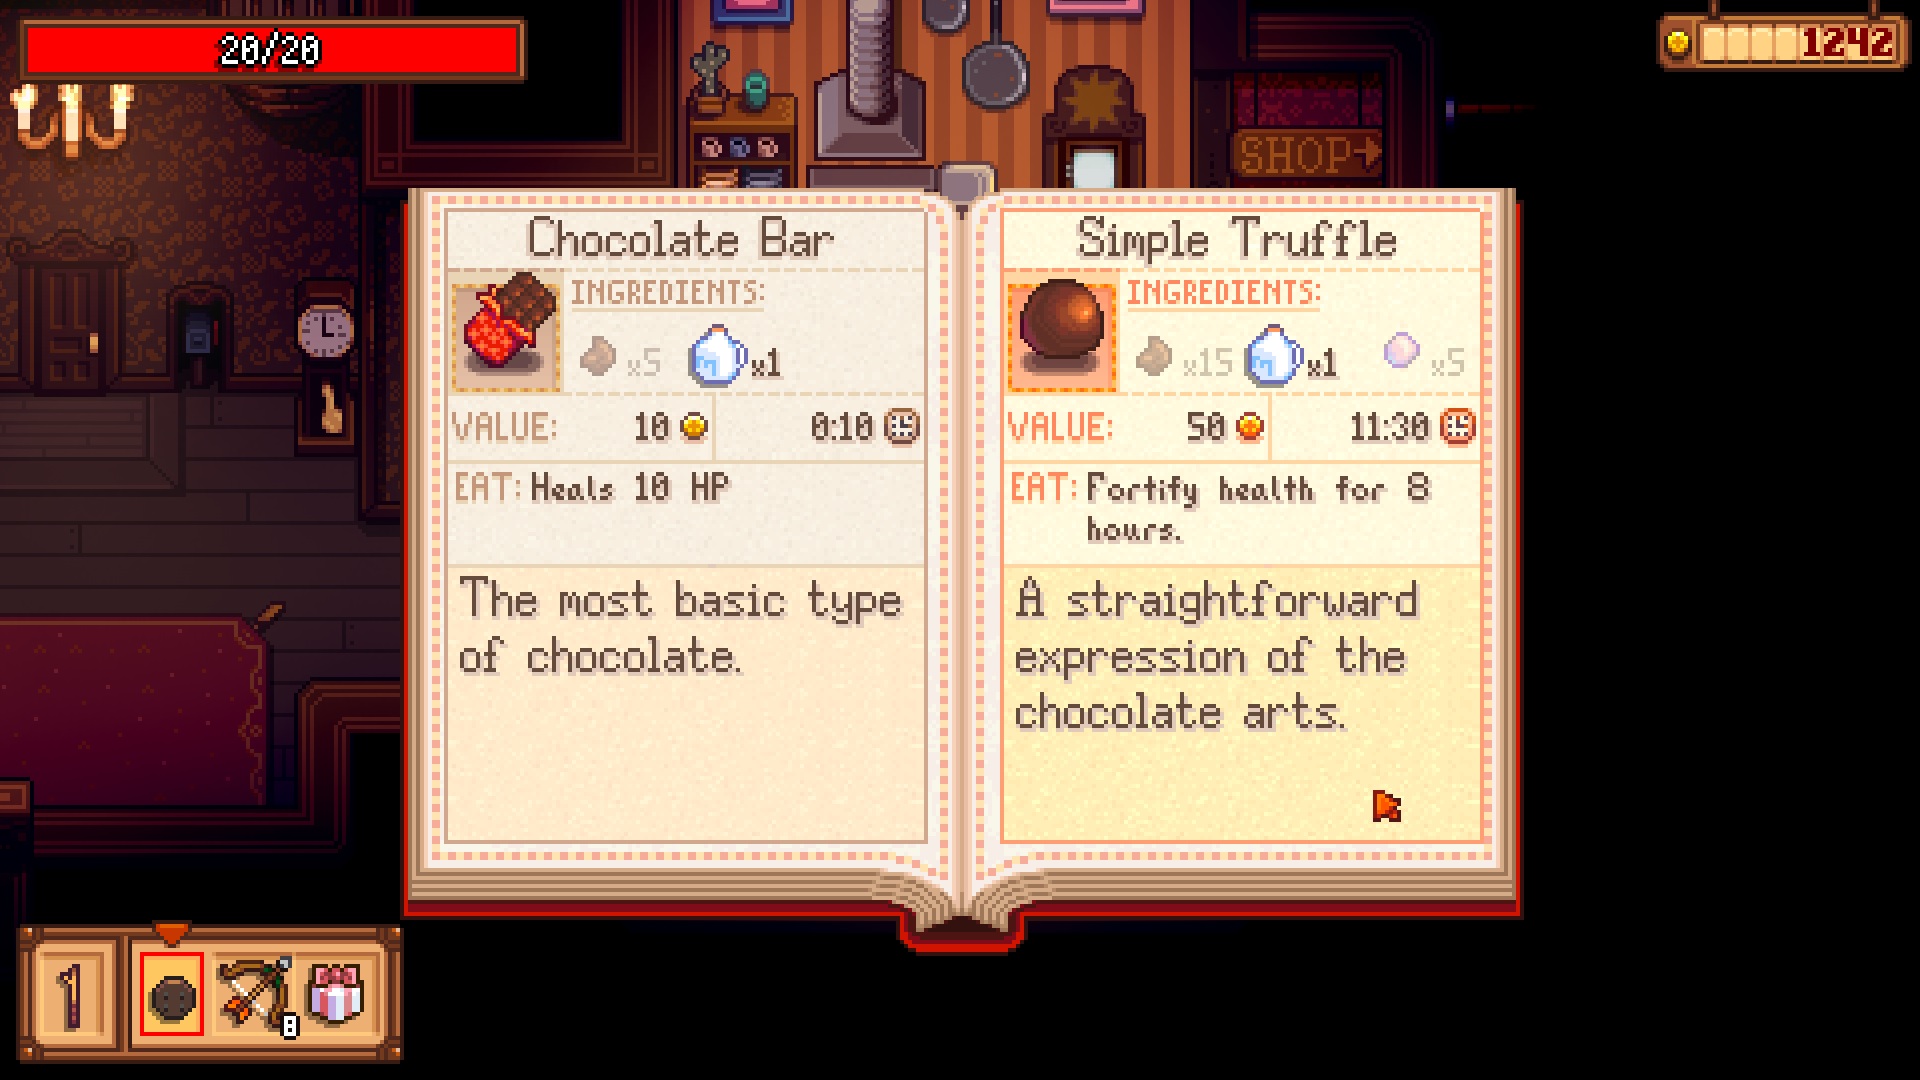 Haunted Chocolatier - A recipe book describing the prices and ingredients for a Chocolate Bar and Simple Truffle